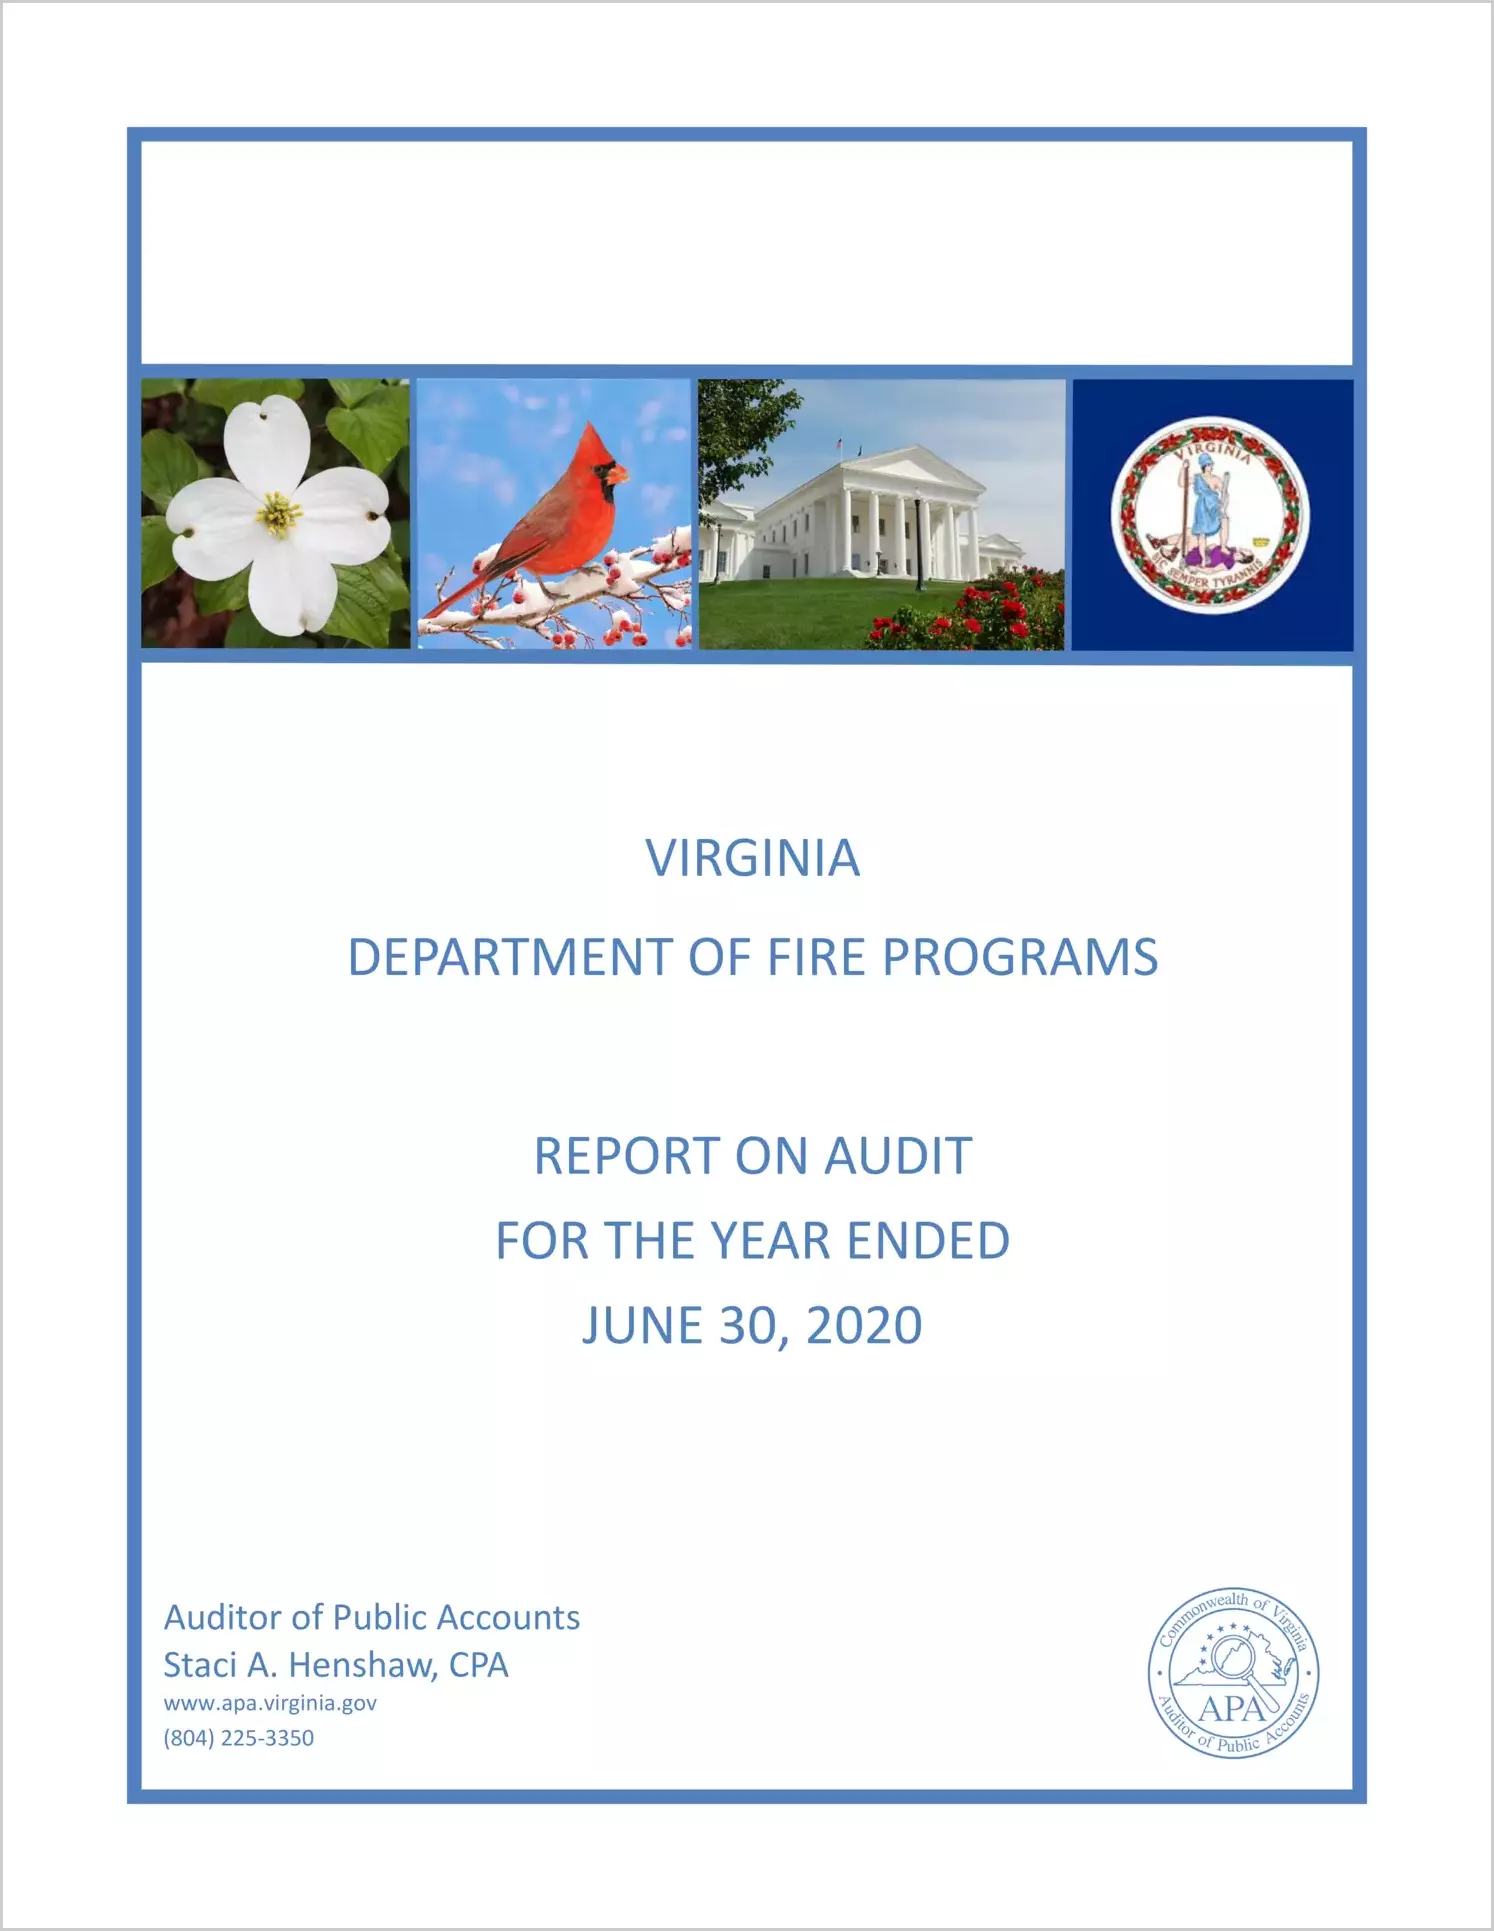 Virginia Department of Fire Programs for the year ended June 30, 2020